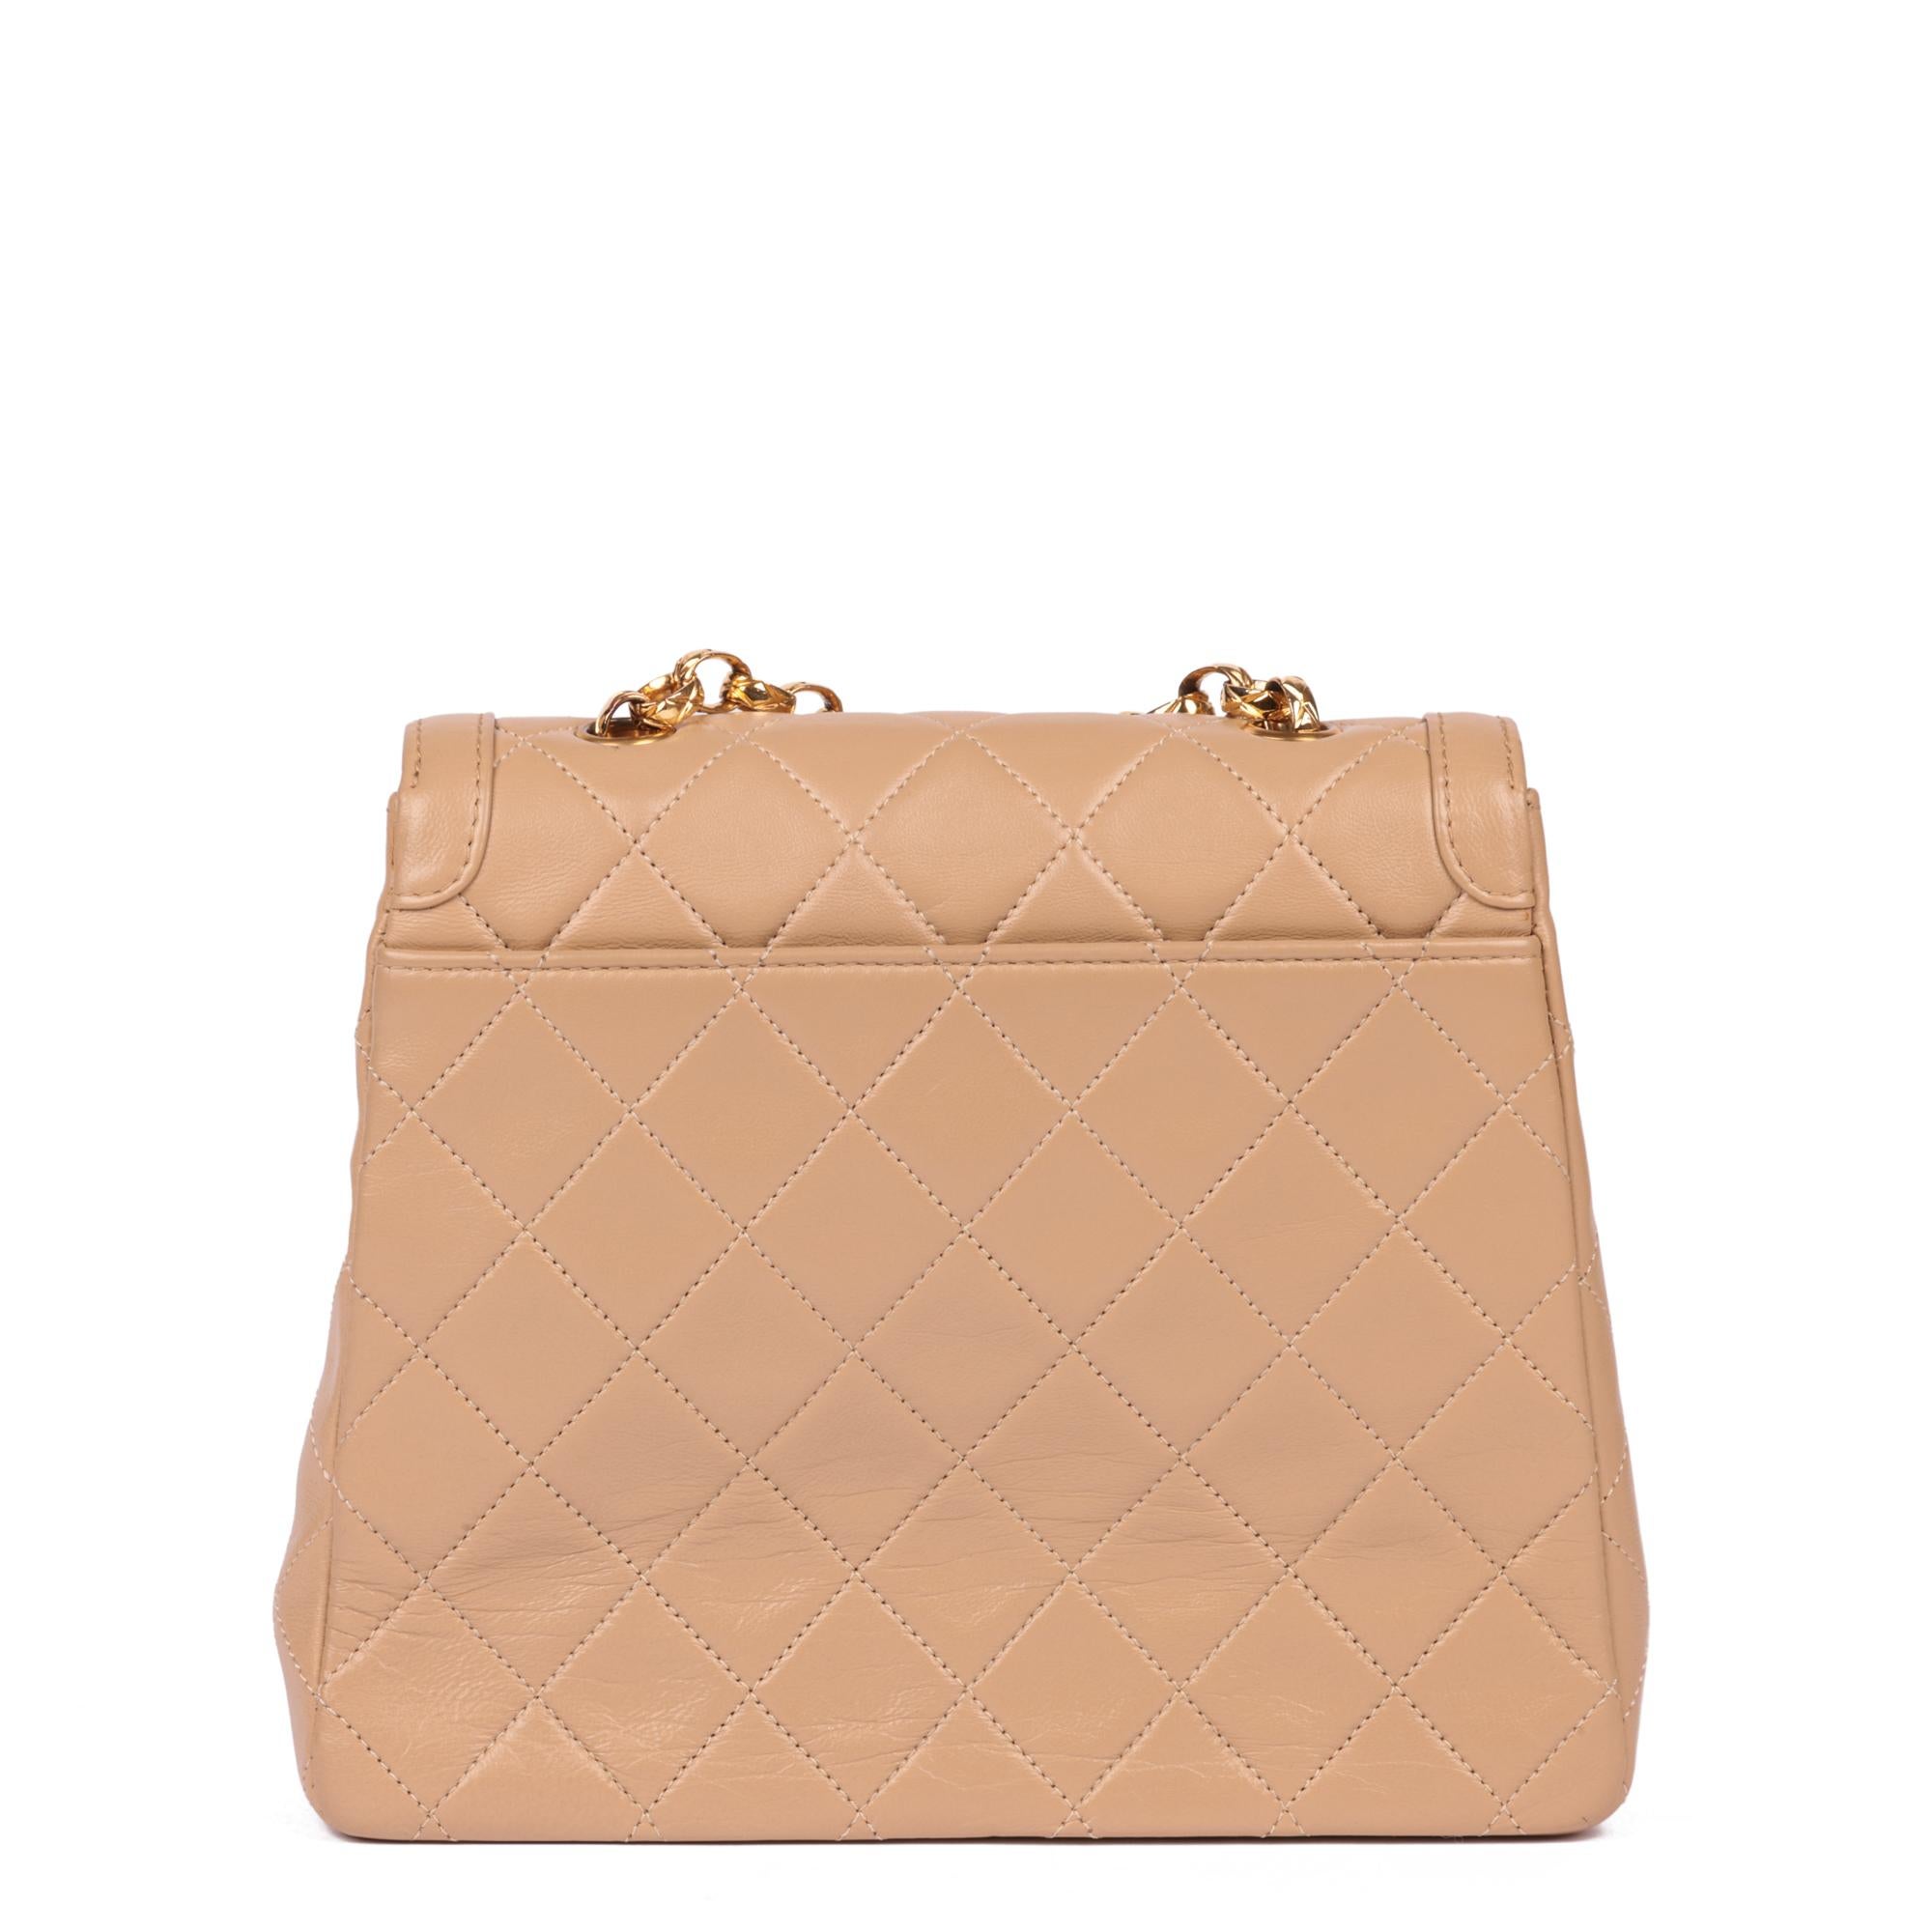 CHANEL Beige Quilted Lambskin Vintage Mini Flap Bag with Wallet For Sale 1